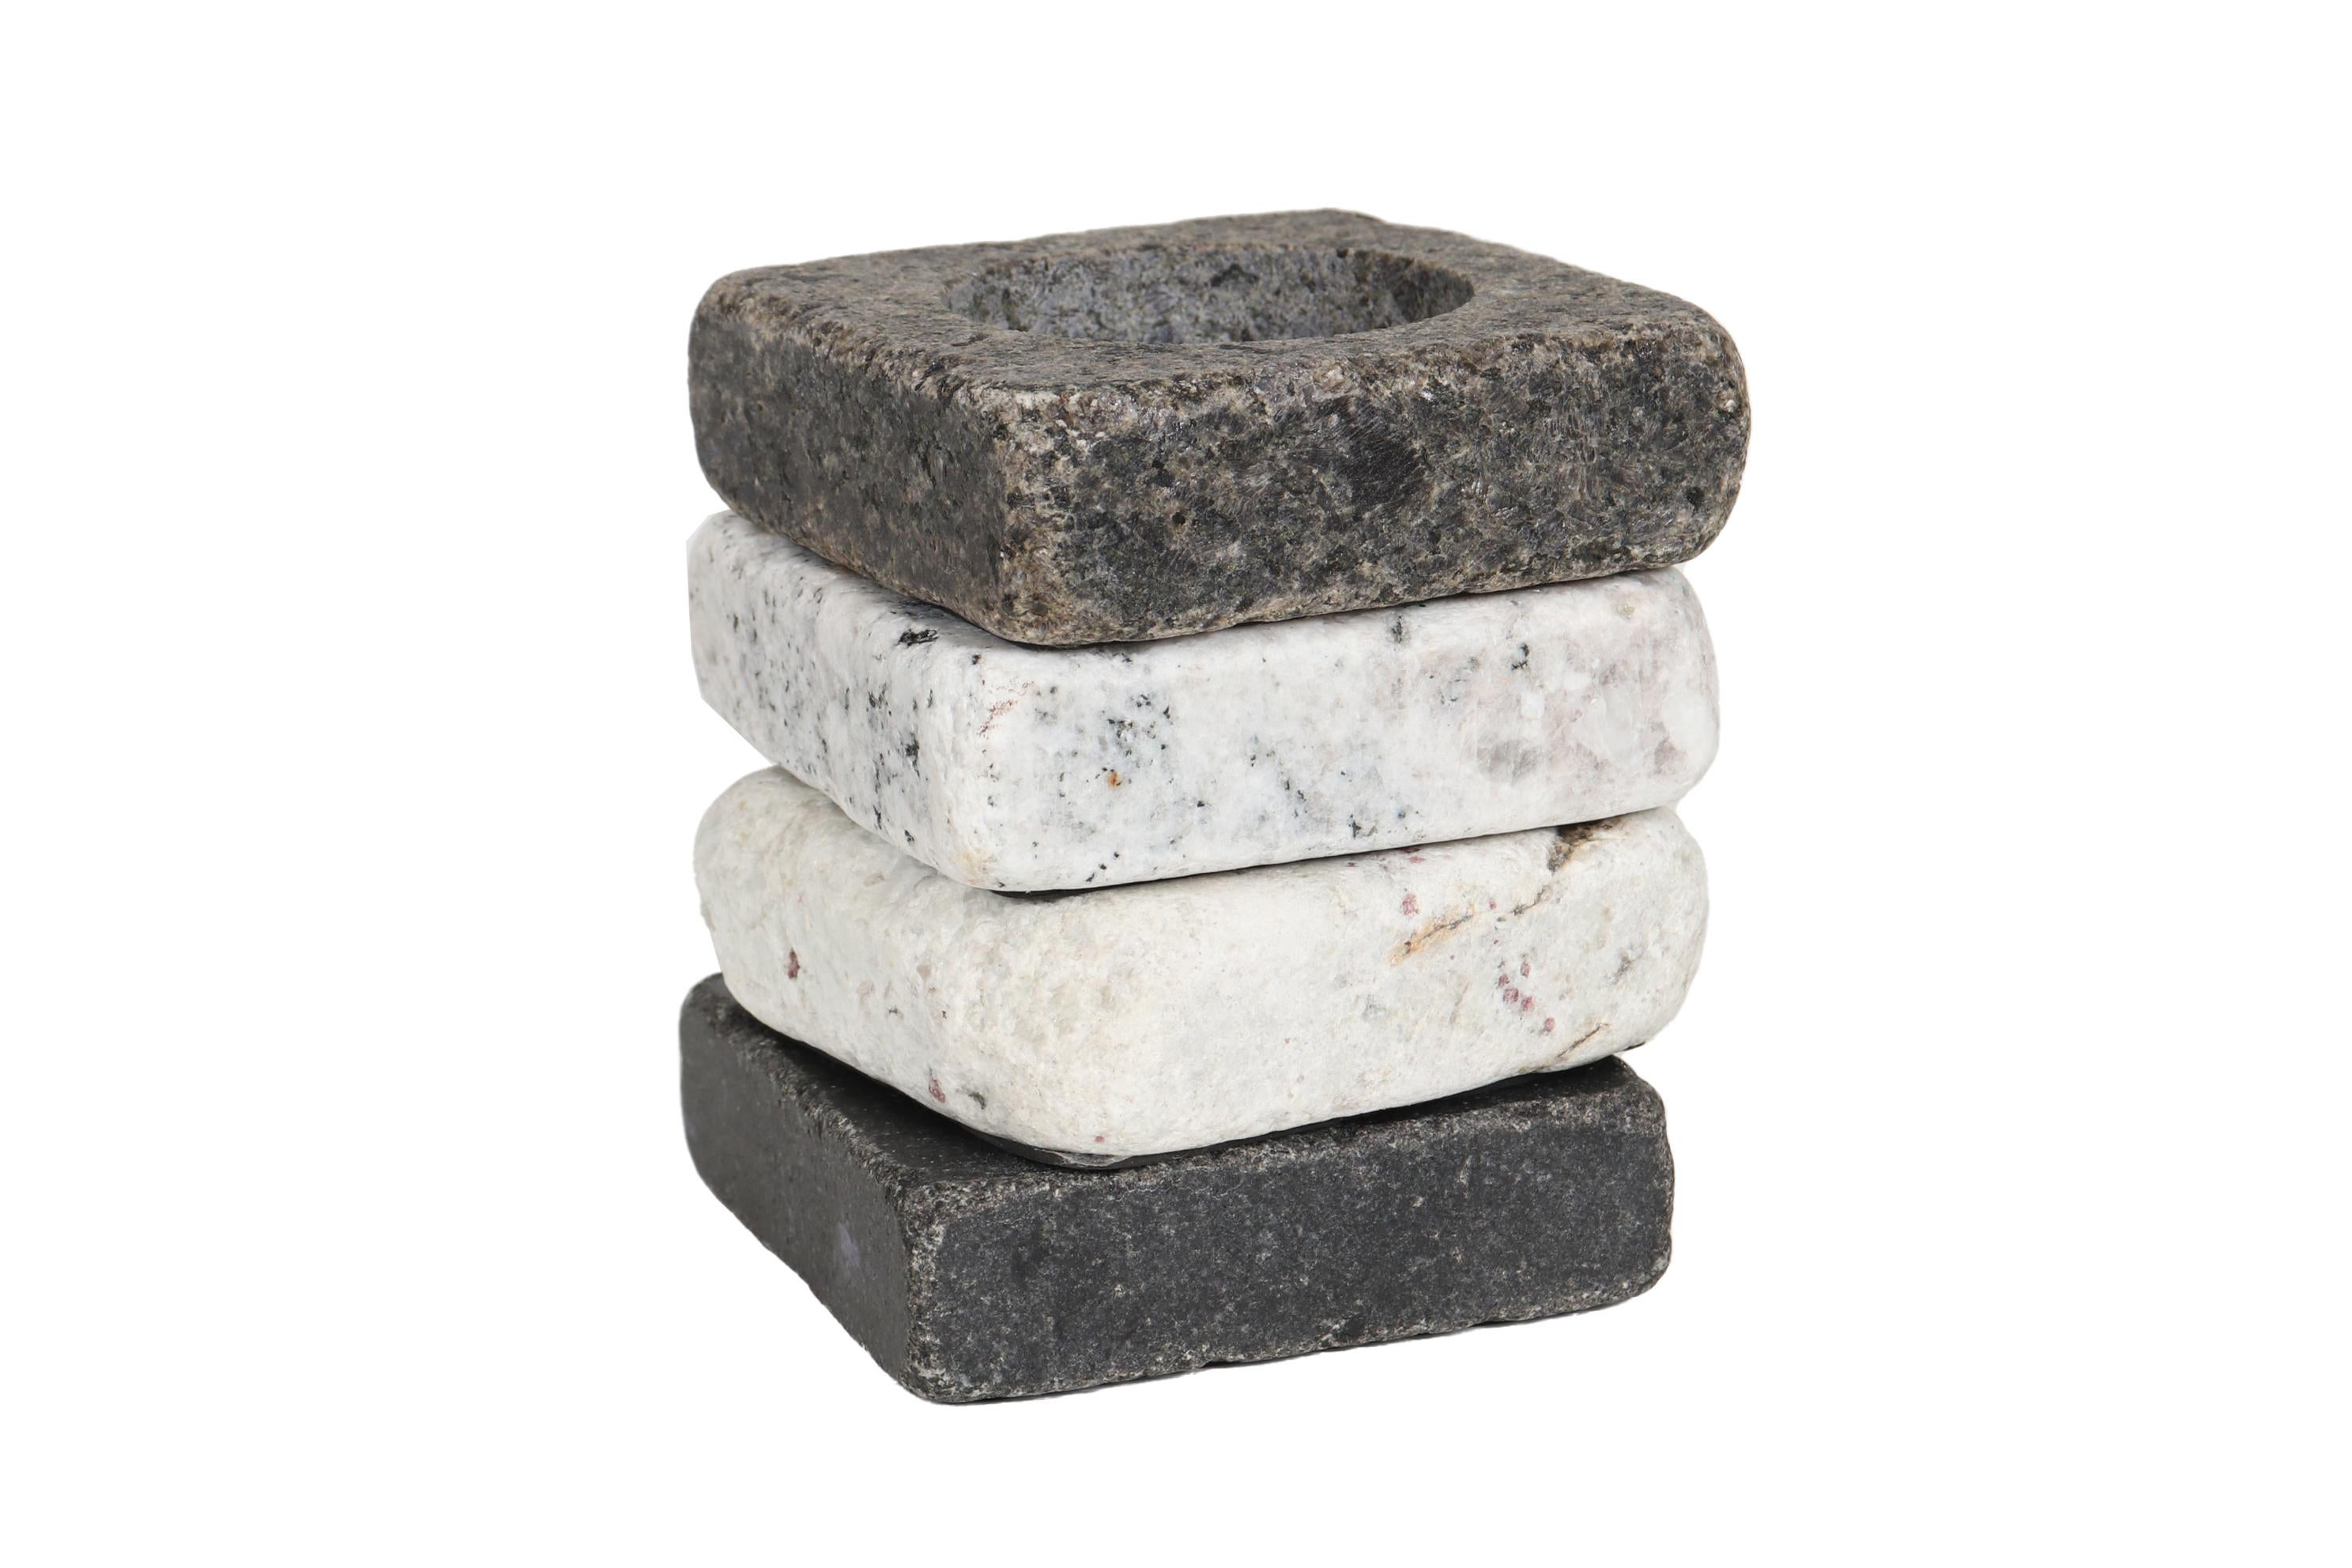 A set of four coastal style sea stone coasters. Thick square sea stones in white, gray and black have rounded corners and deep round holes to support cups and flasks. Finished on the bottom with a cork and rubber base. Each is marked “Sea Stones”